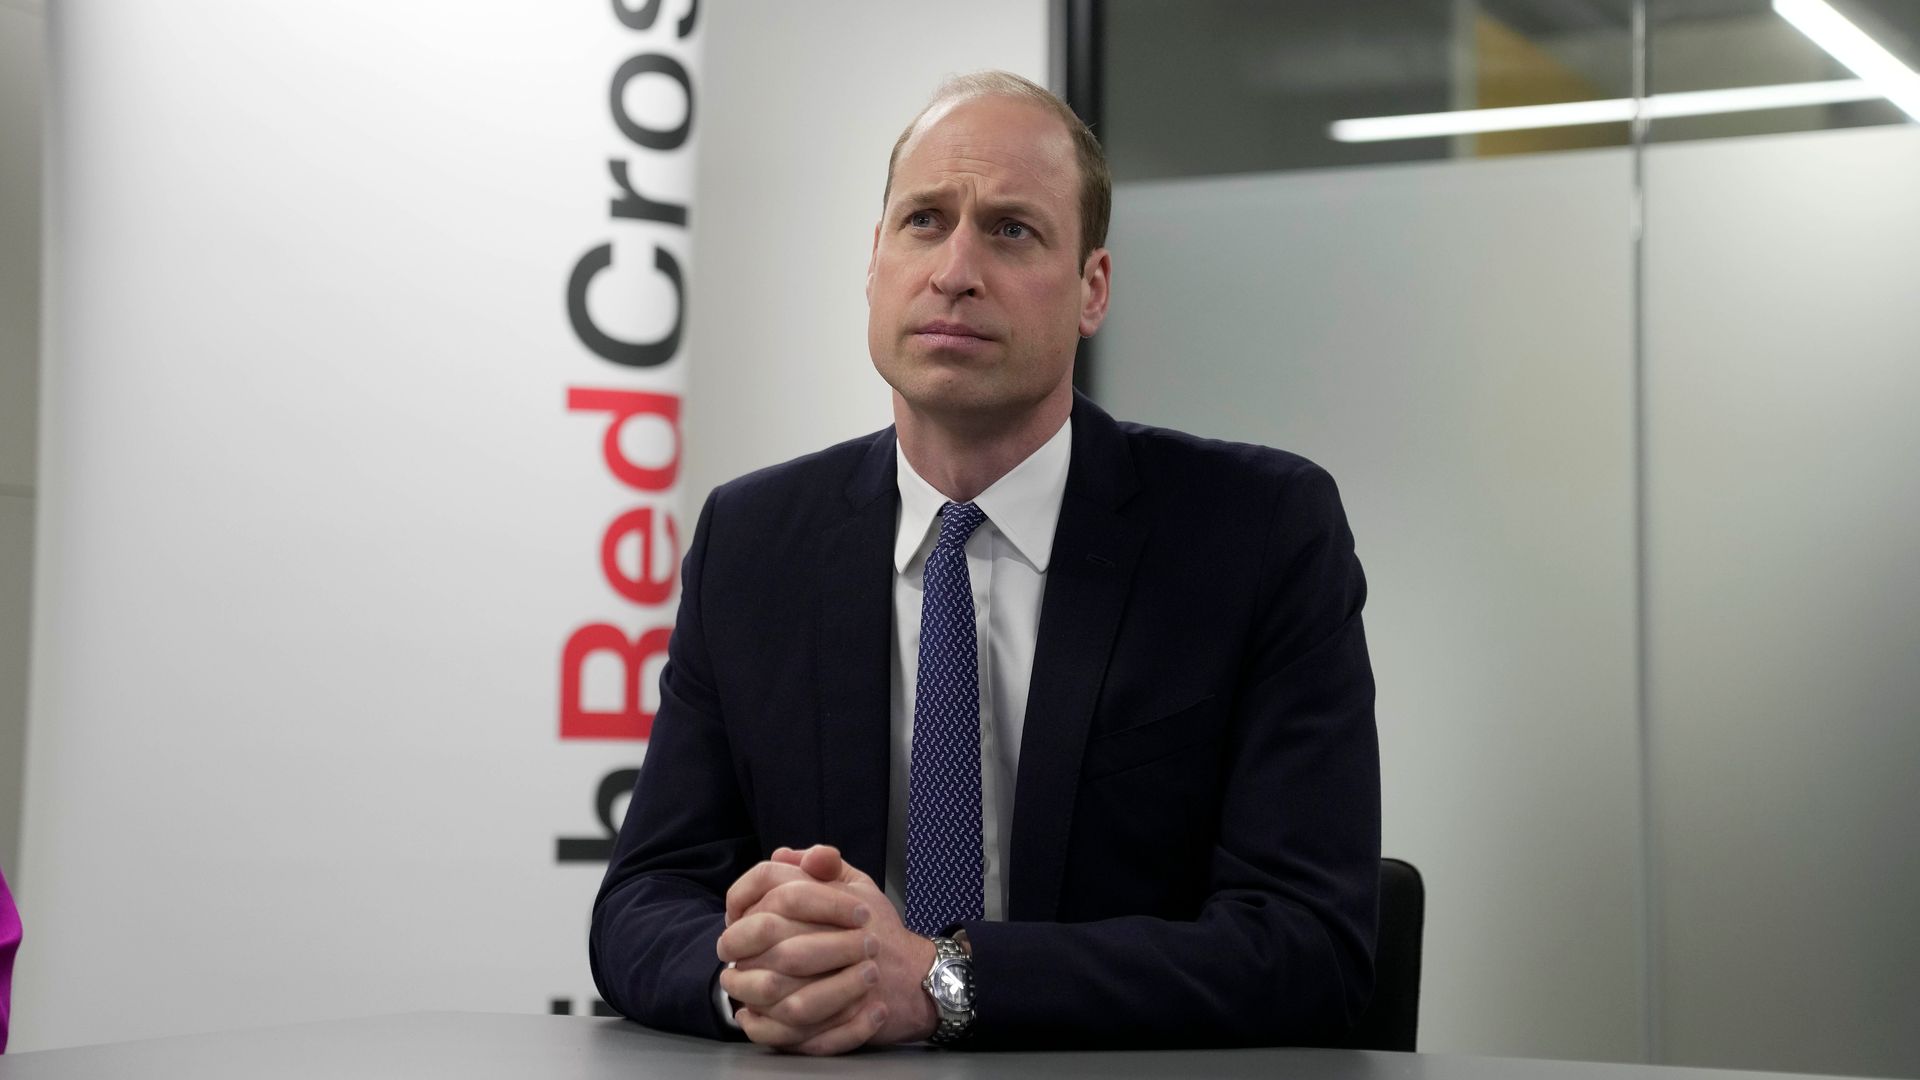 Prince William visits the British Red Cross HQ